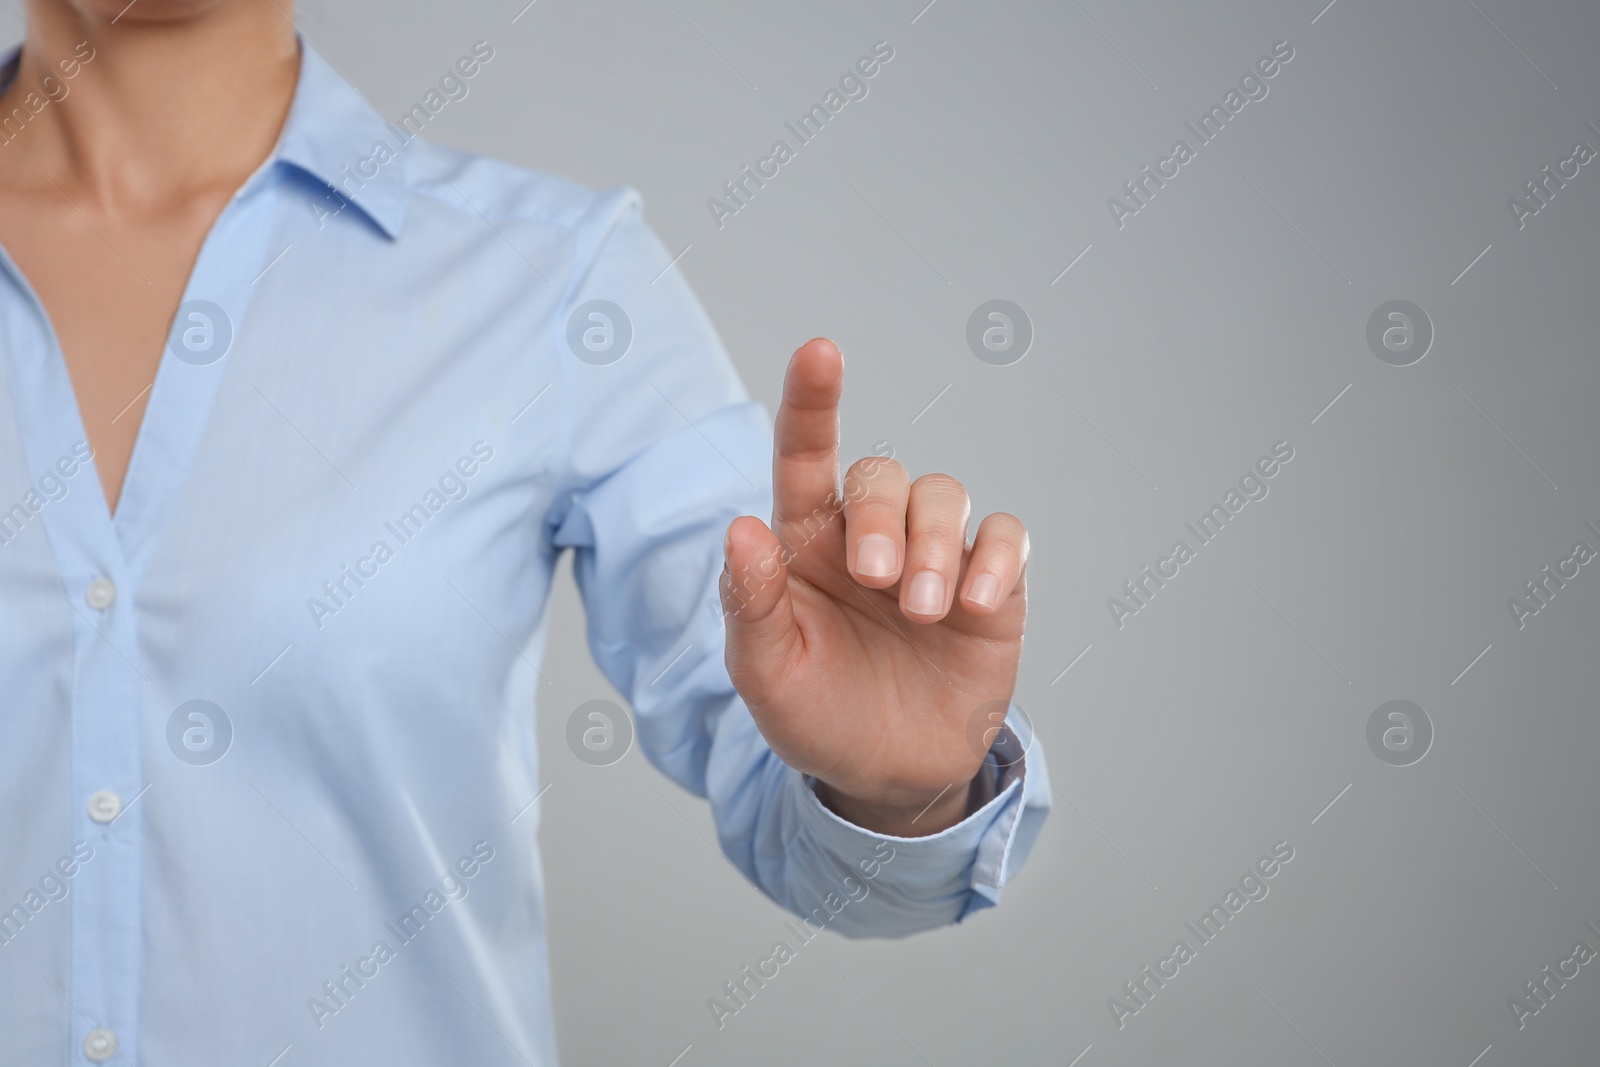 Photo of Woman touching something against grey background, focus on hand